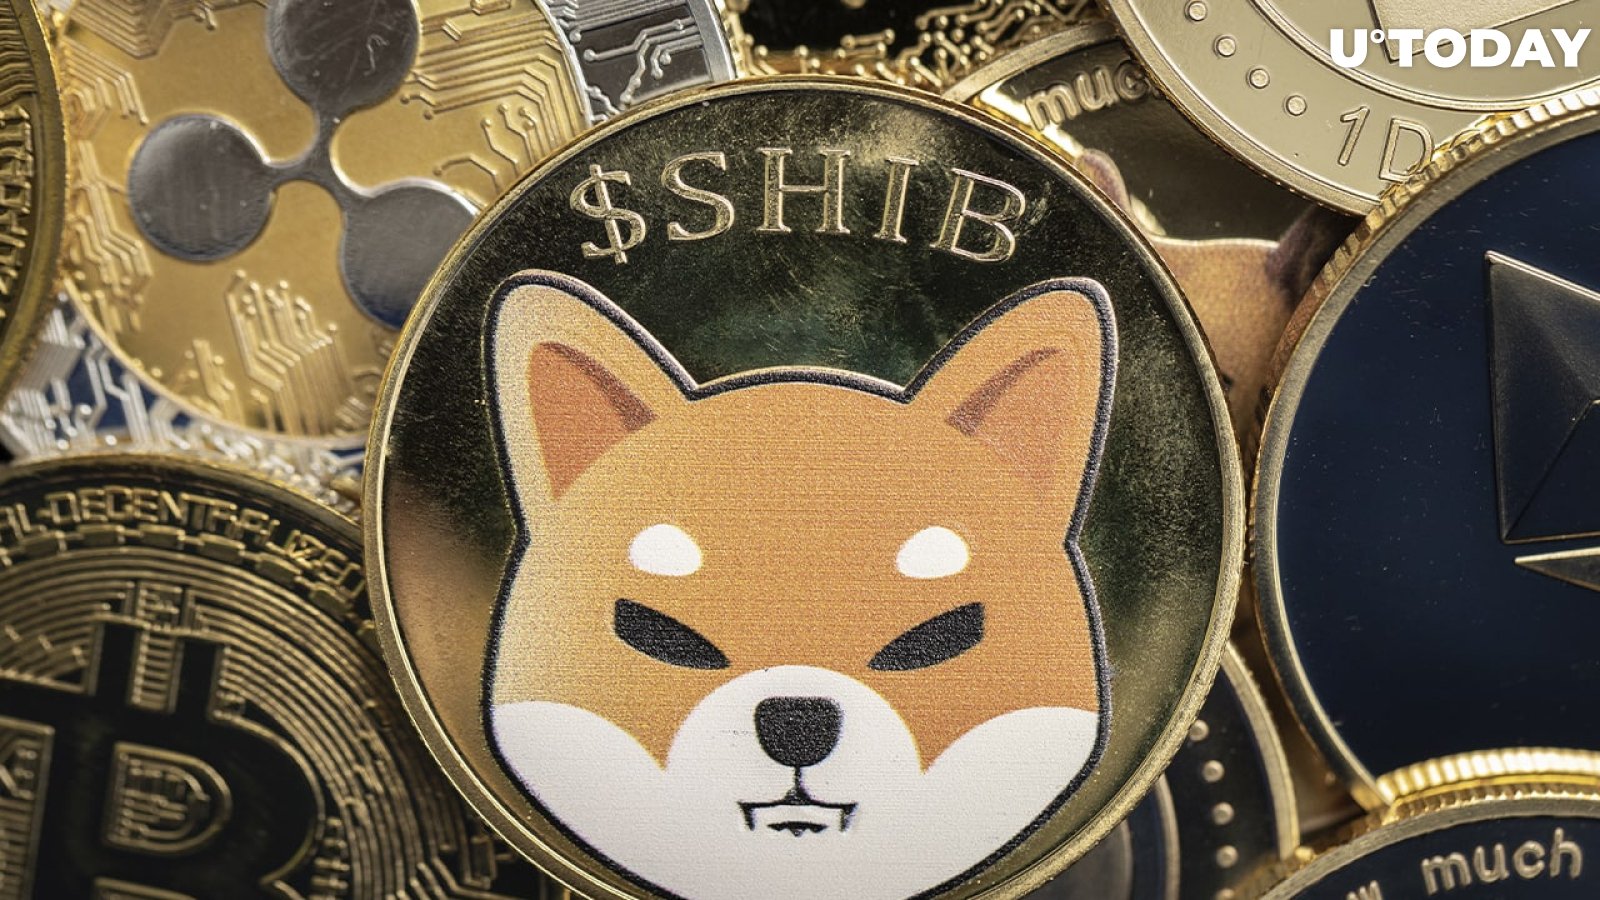 Robinhood Introduces New Feature for Shiba Inu and Other Coins